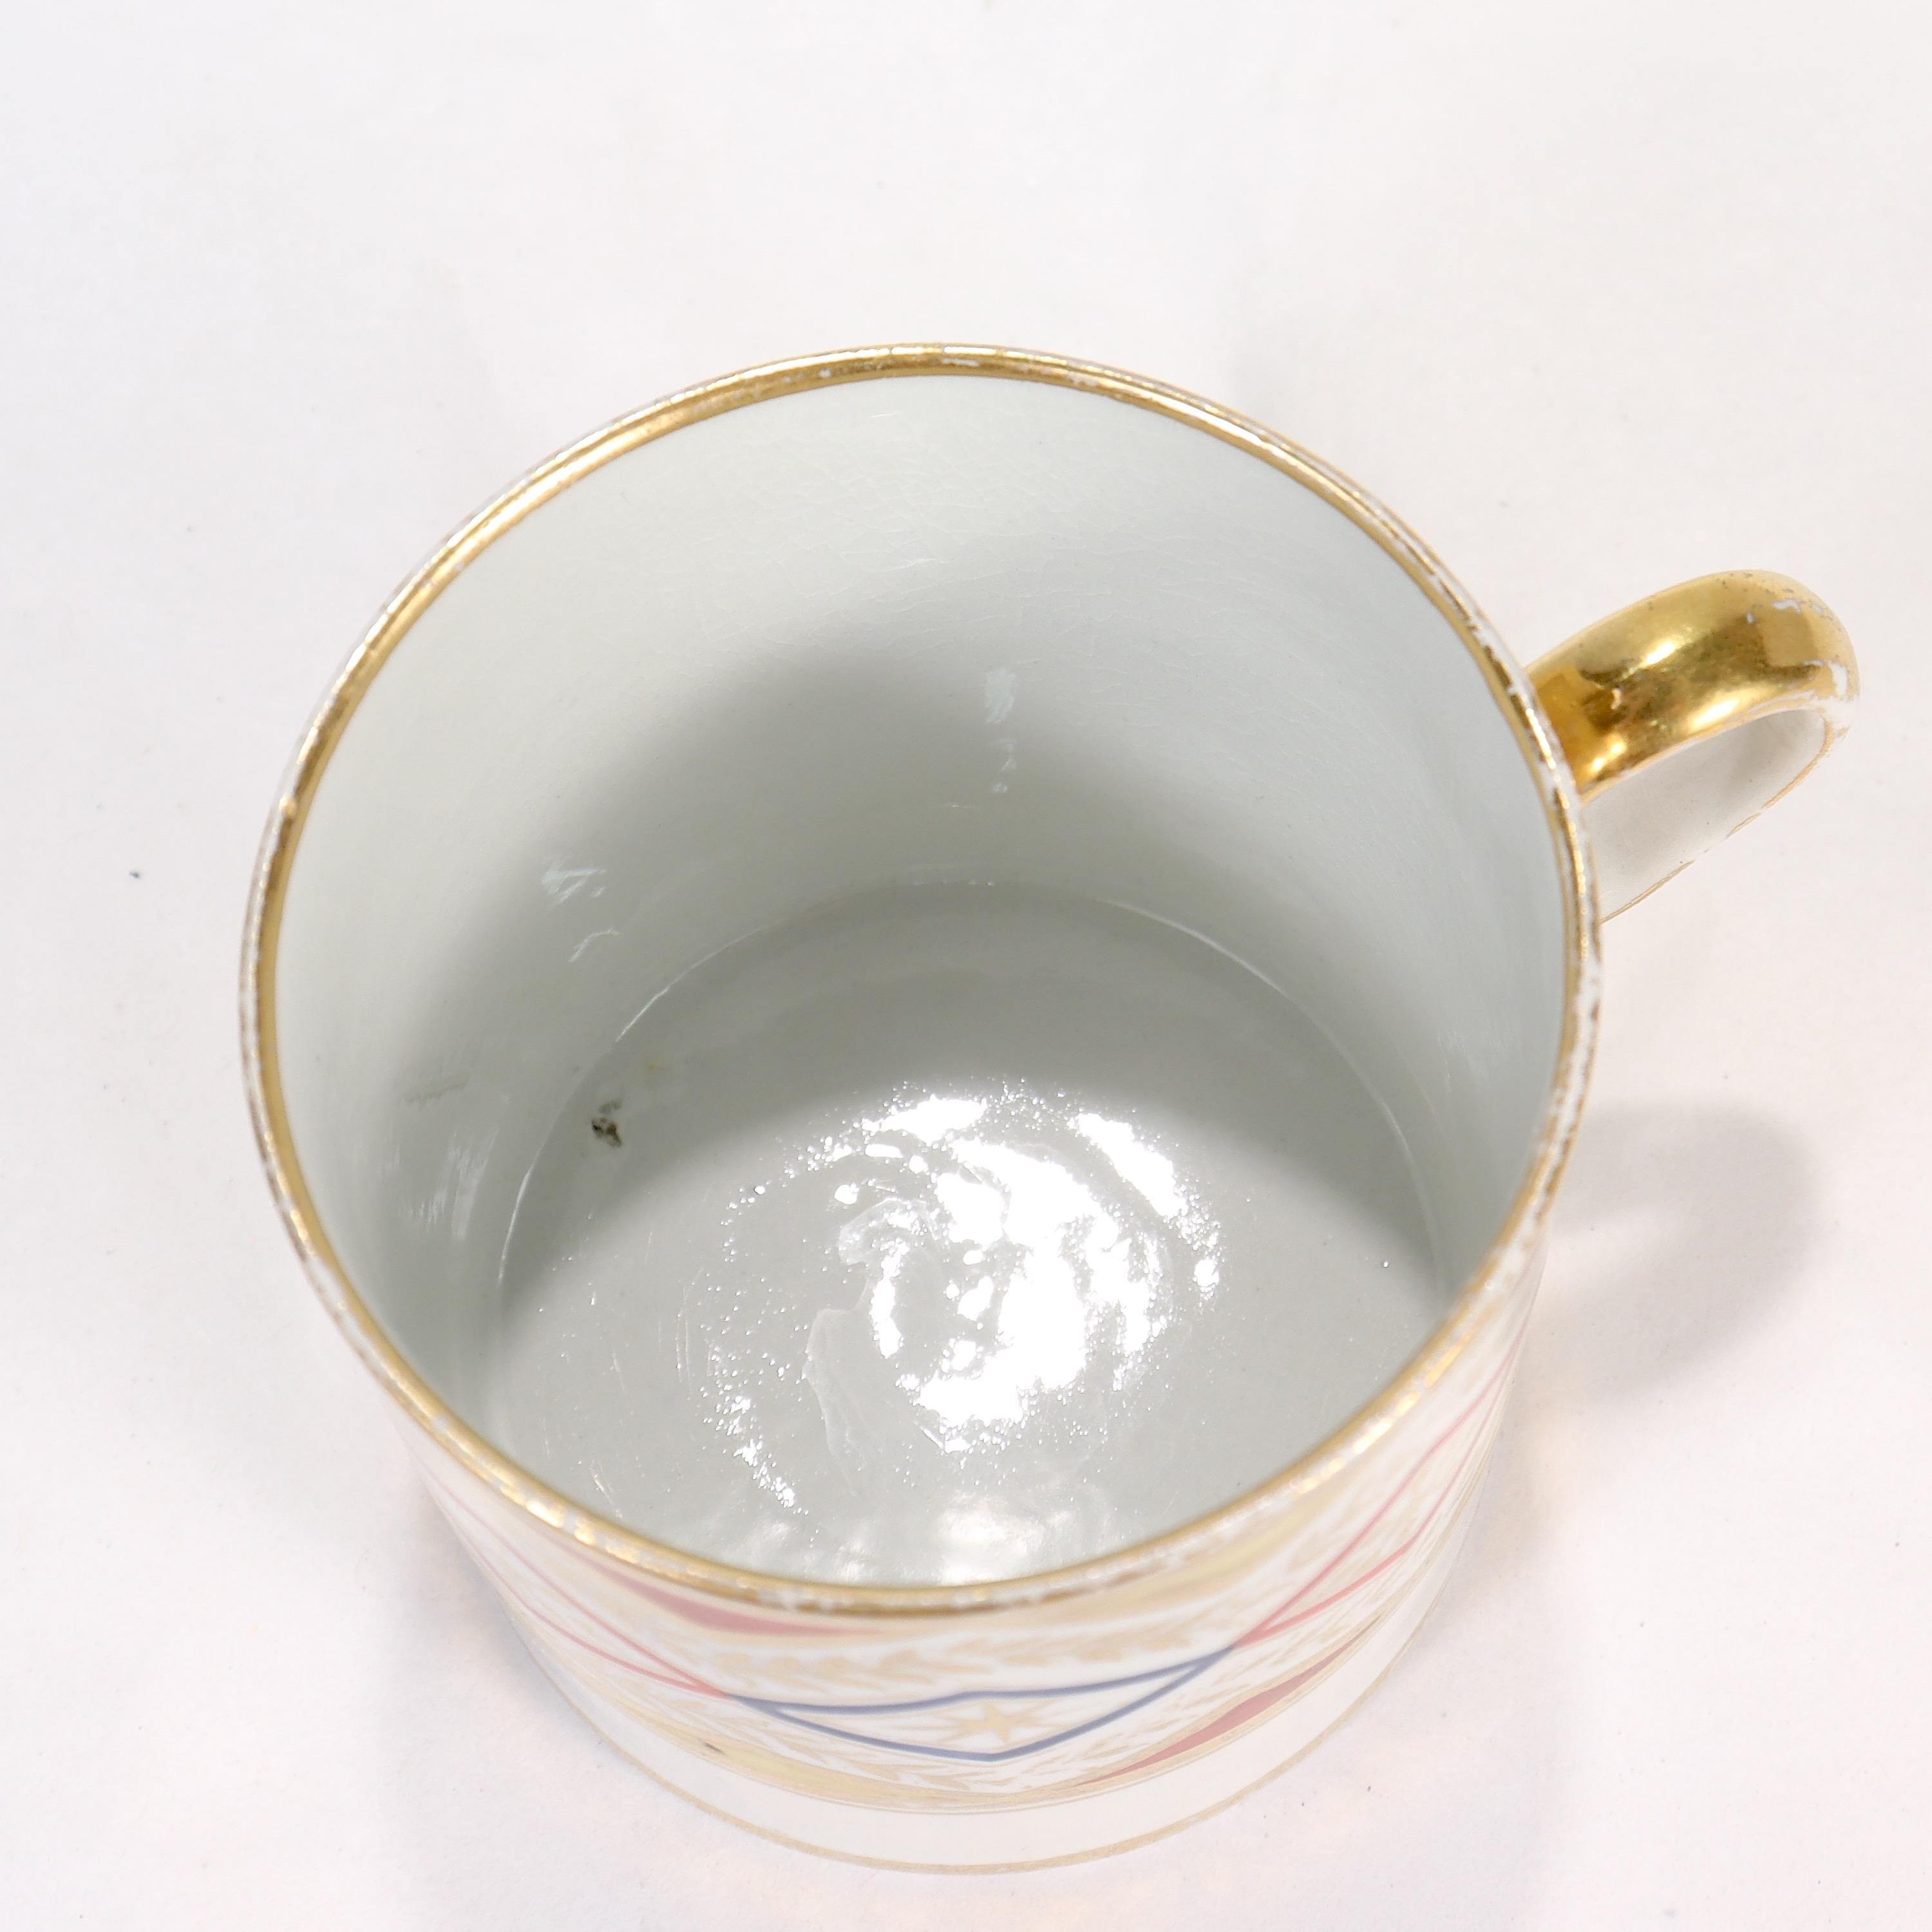 Antique Coalport English Porcelain Neoclassical Coffee Cann or Cup 3